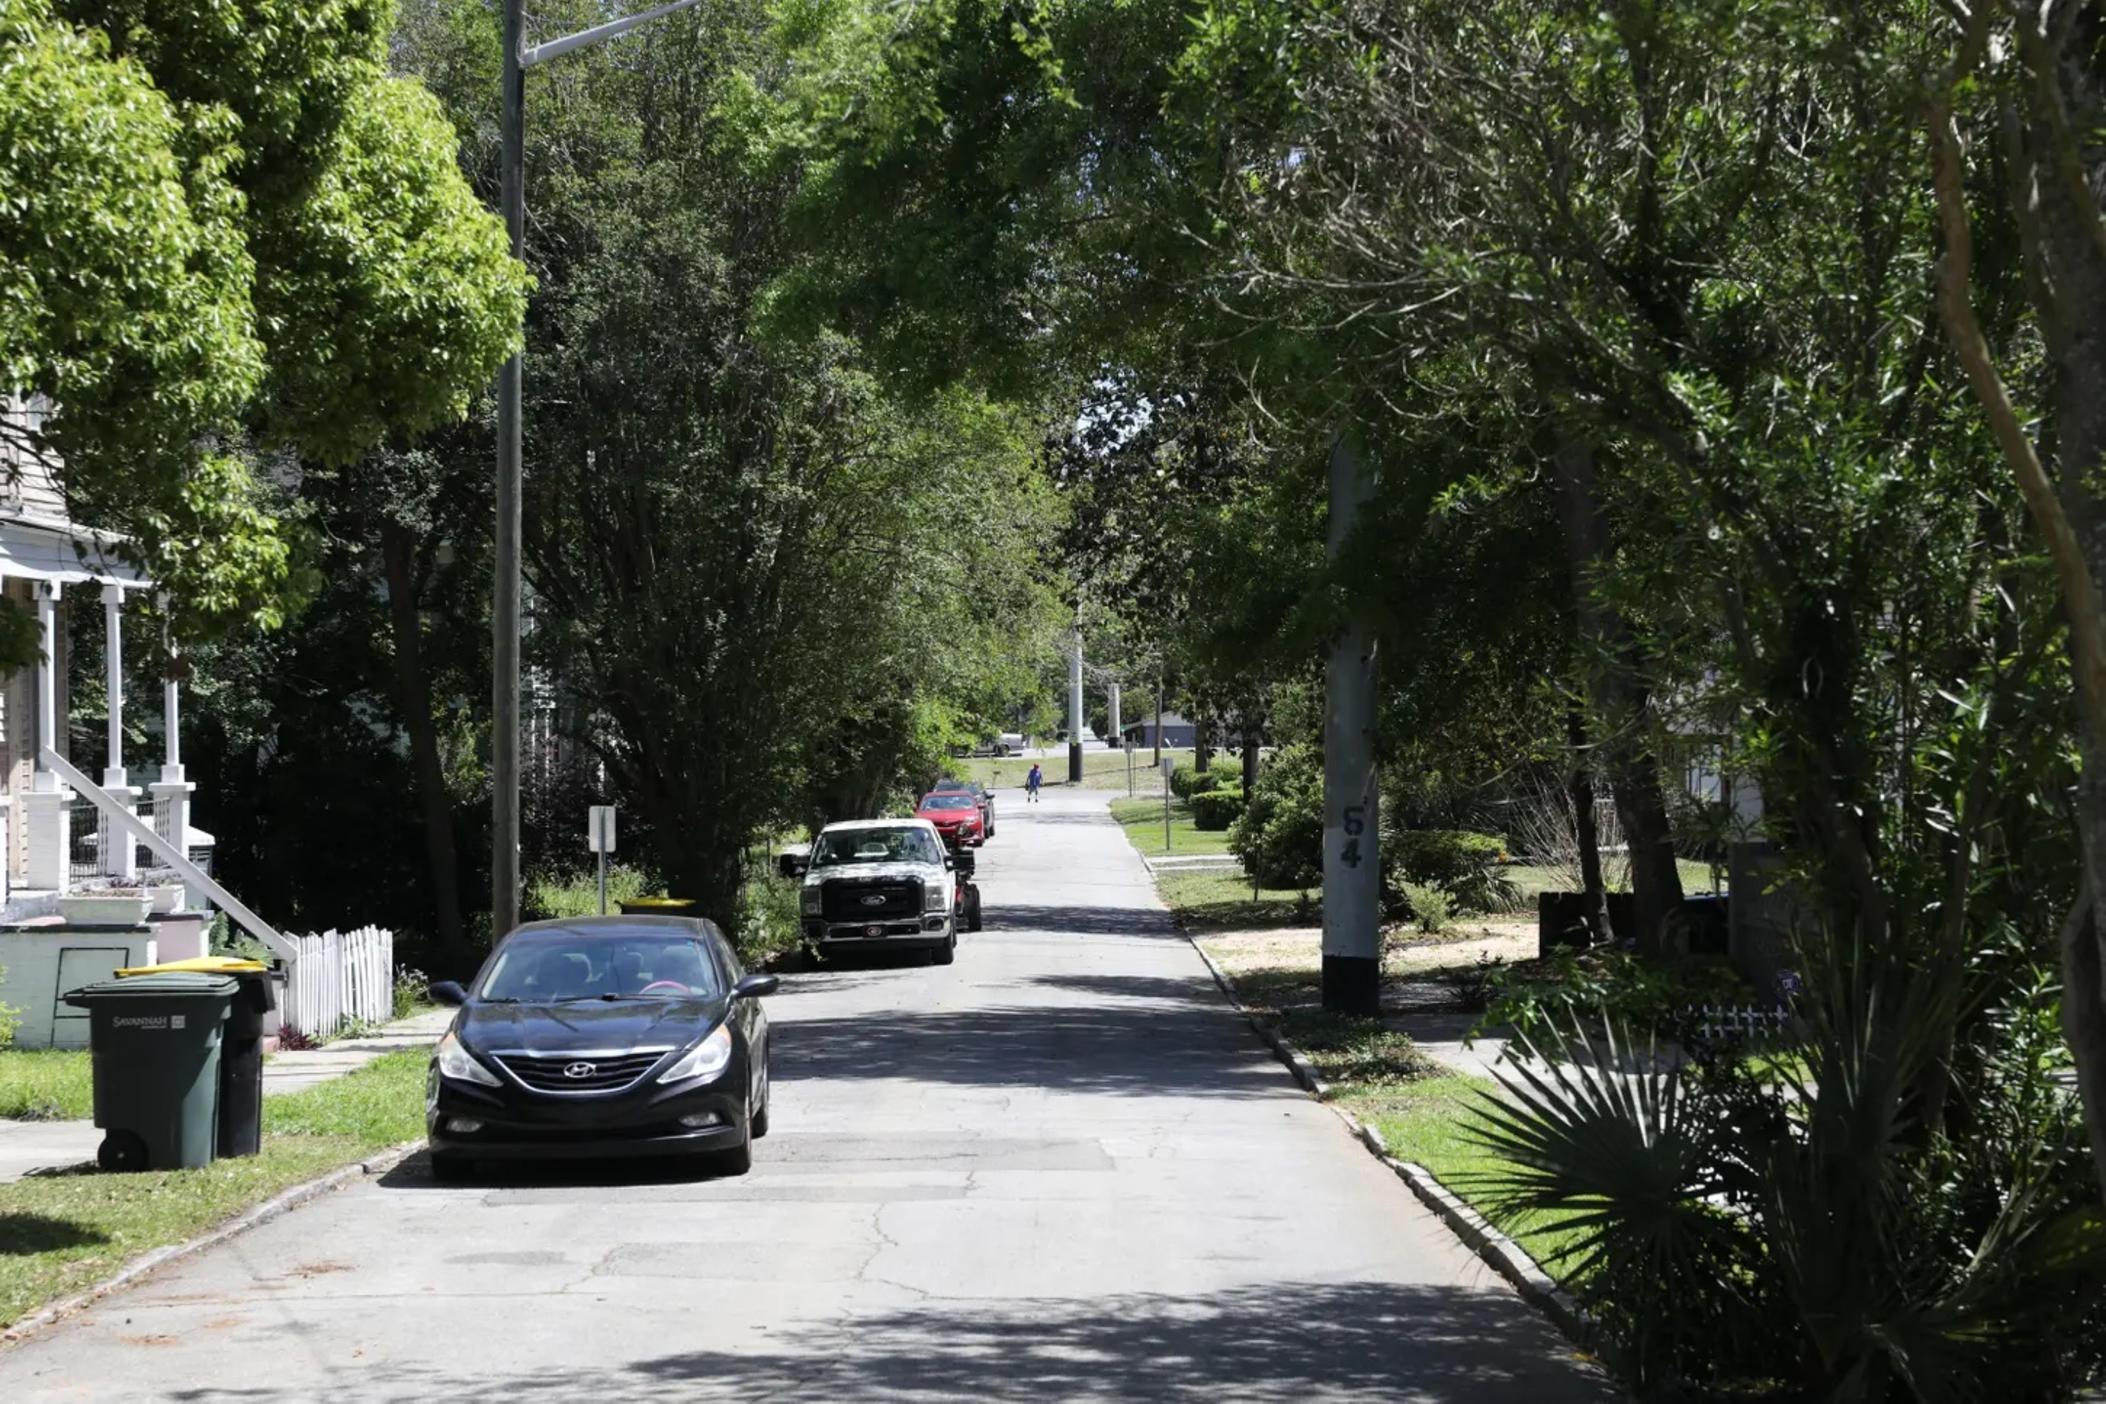  The block in Savannah, Georgia, where Texas billionaire Harlan Crow bought property from Supreme Court Justice Clarence Thomas. Today, the vacant lots Thomas sold to Crow have been replaced by two-story homes. Credit: Octavio Jones for ProPublica 